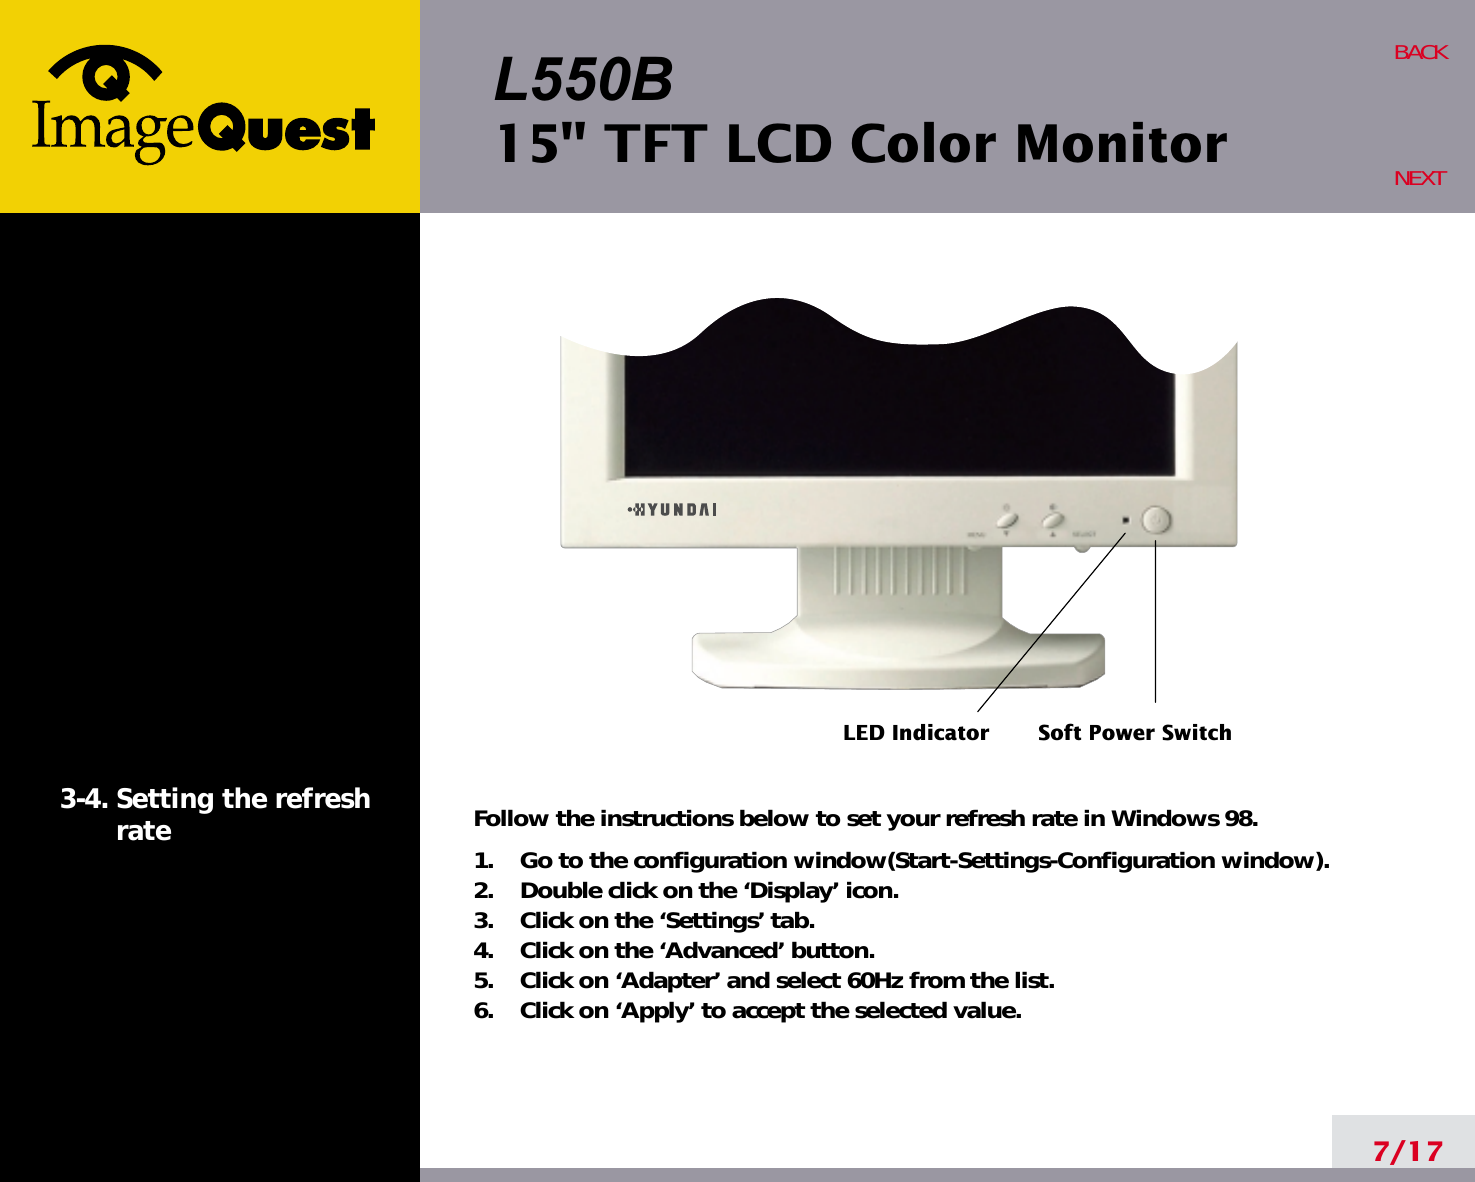 L550B15&quot; TFT LCD Color Monitor7/17BACKNEXT3-4. Setting the refreshrate Follow the instructions below to set your refresh rate in Windows 98.1.    Go to the configuration window(Start-Settings-Configuration window).2.    Double click on the ‘Display’ icon.3.    Click on the ‘Settings’ tab.4.    Click on the ‘Advanced’ button.5.    Click on ‘Adapter’ and select 60Hz from the list.6.    Click on ‘Apply’ to accept the selected value.LED Indicator Soft Power Switch